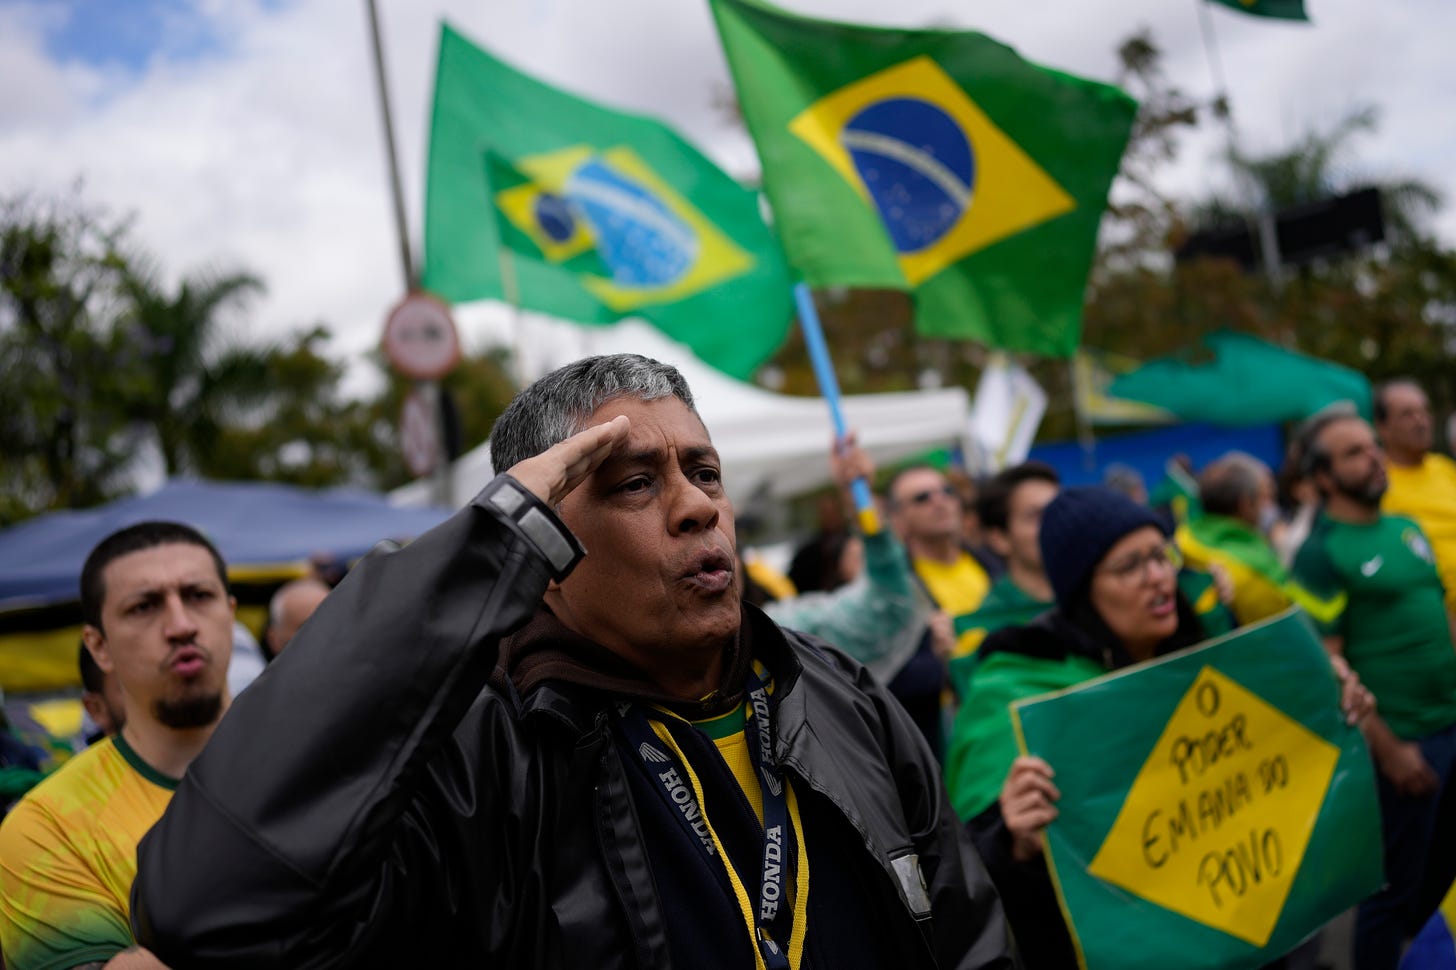 A supporter of Brazilian President Jair Bolsonaro salutes while singing the nation's anthem outside a military base during a protest against his reelection defeat in Sao Paulo, Brazil.